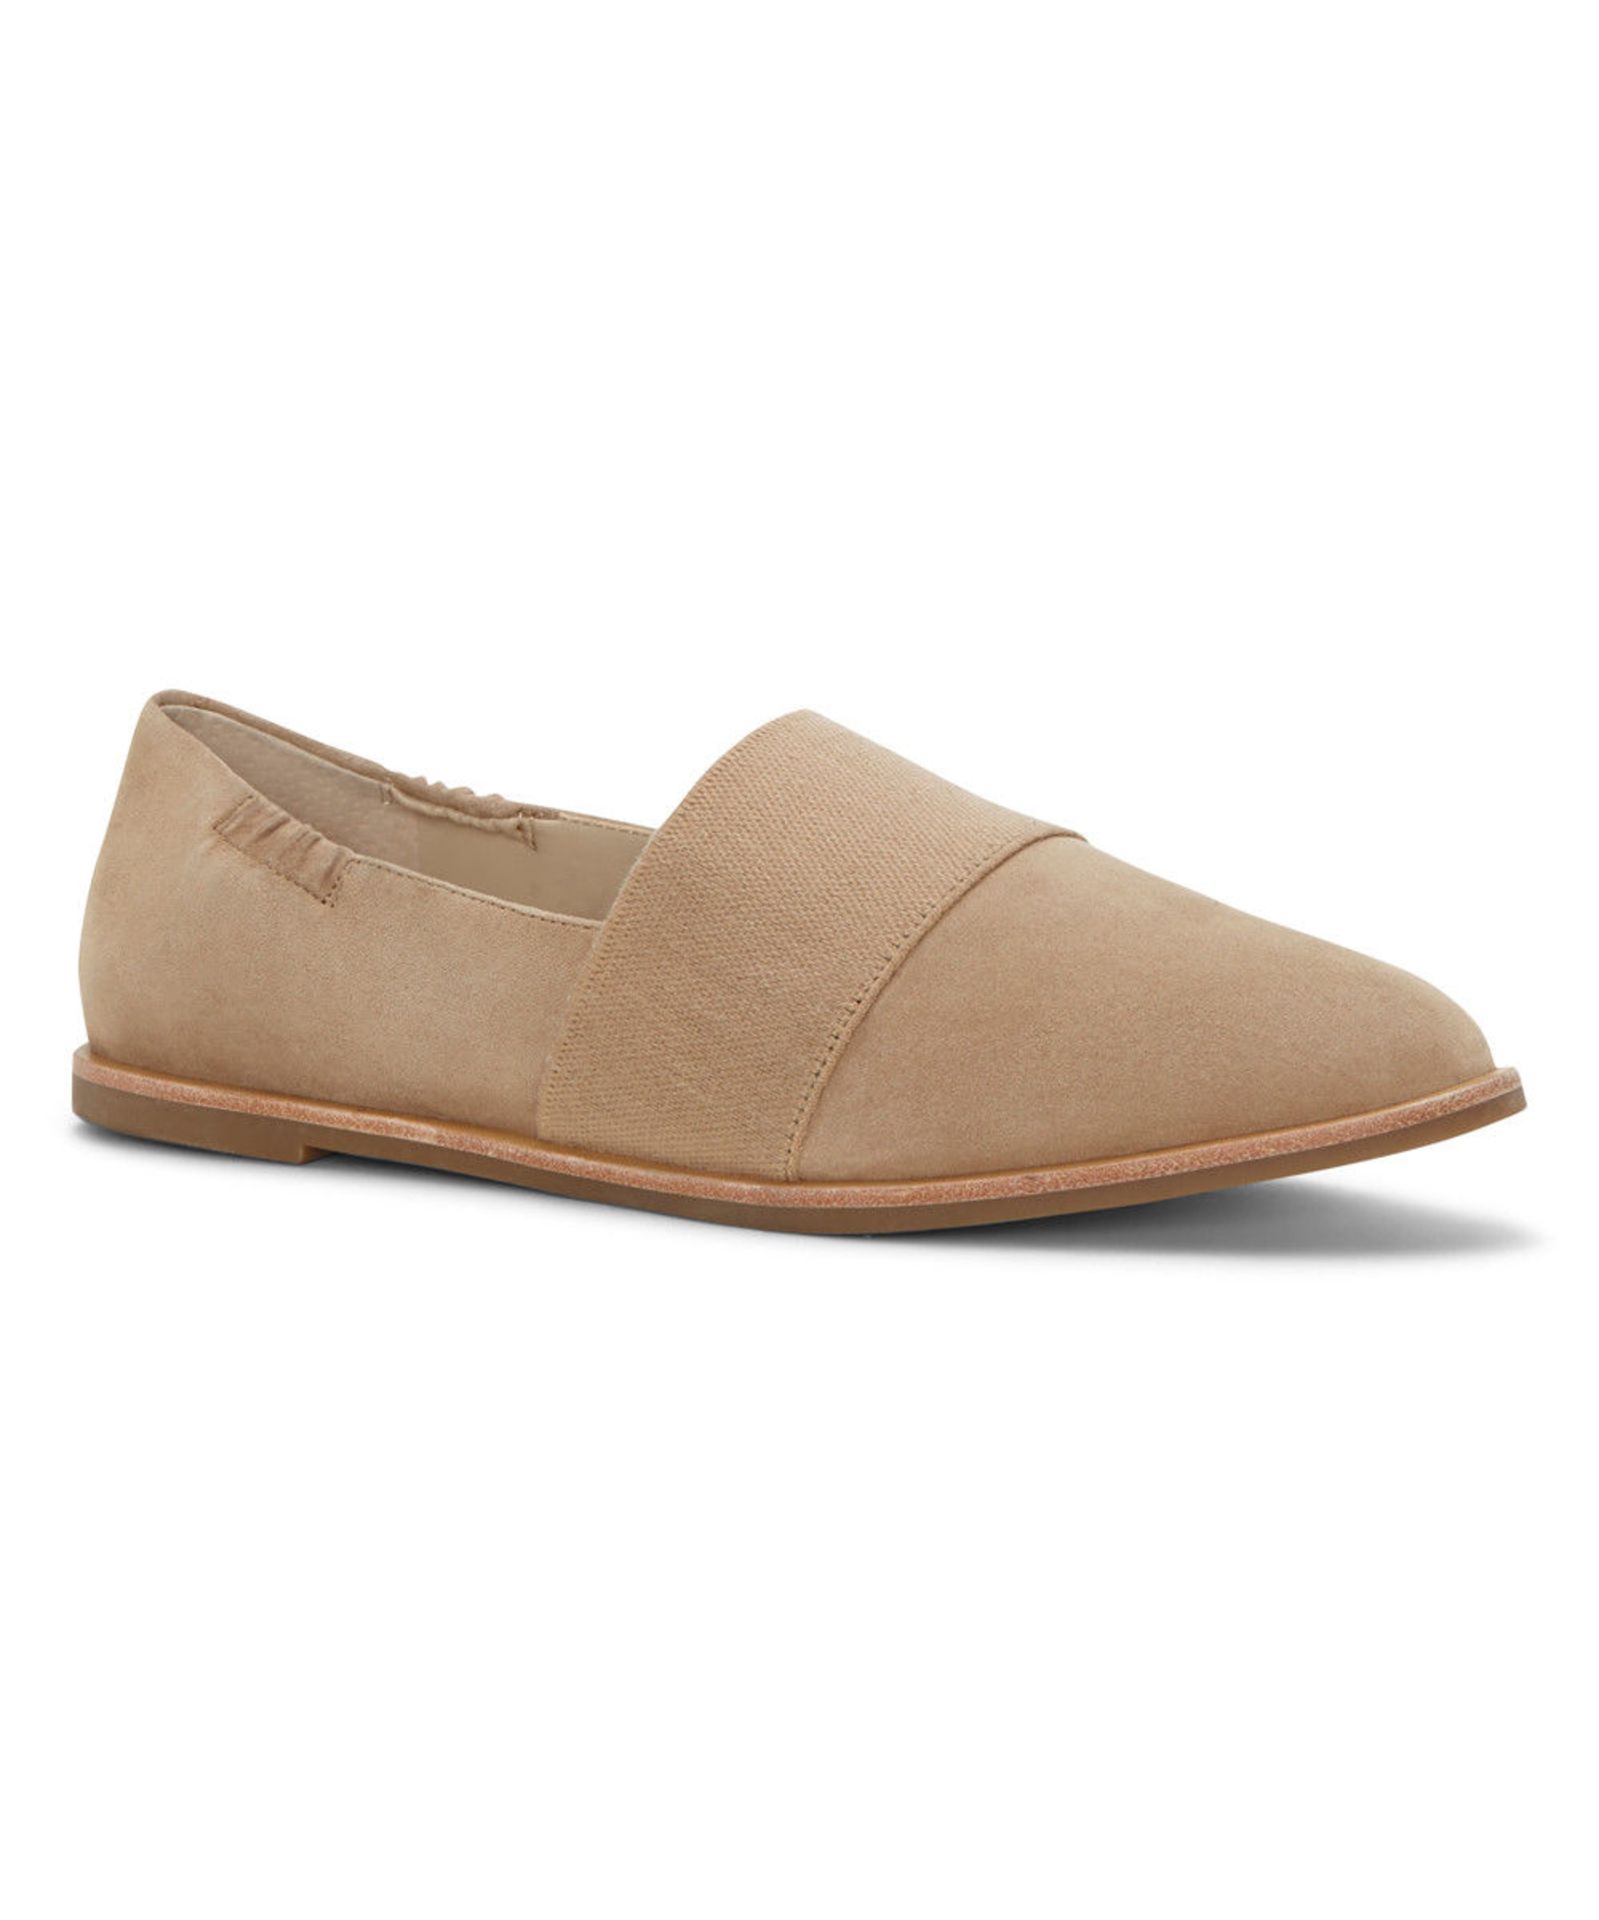 Ed By Ellen Degeneres, Sahara Karlin Leather Loafer - Women, Size Uk 4-4.5 Us 6. (New With Box) [